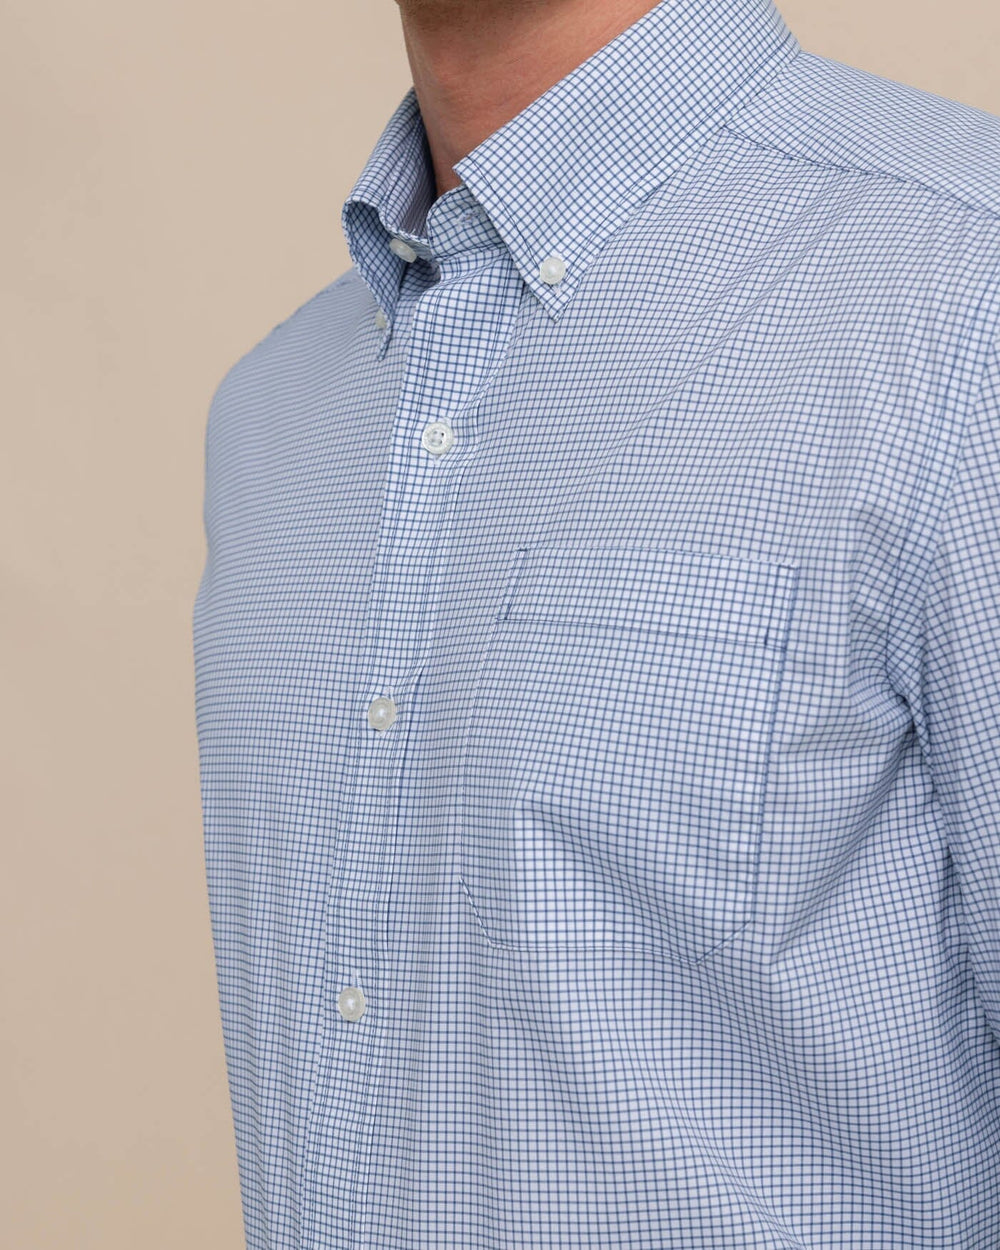 The front view of the Men's Rosemont Brrr® Intercoastal Performance Sport Shirt by Southern Tide - Seven Seas Blue